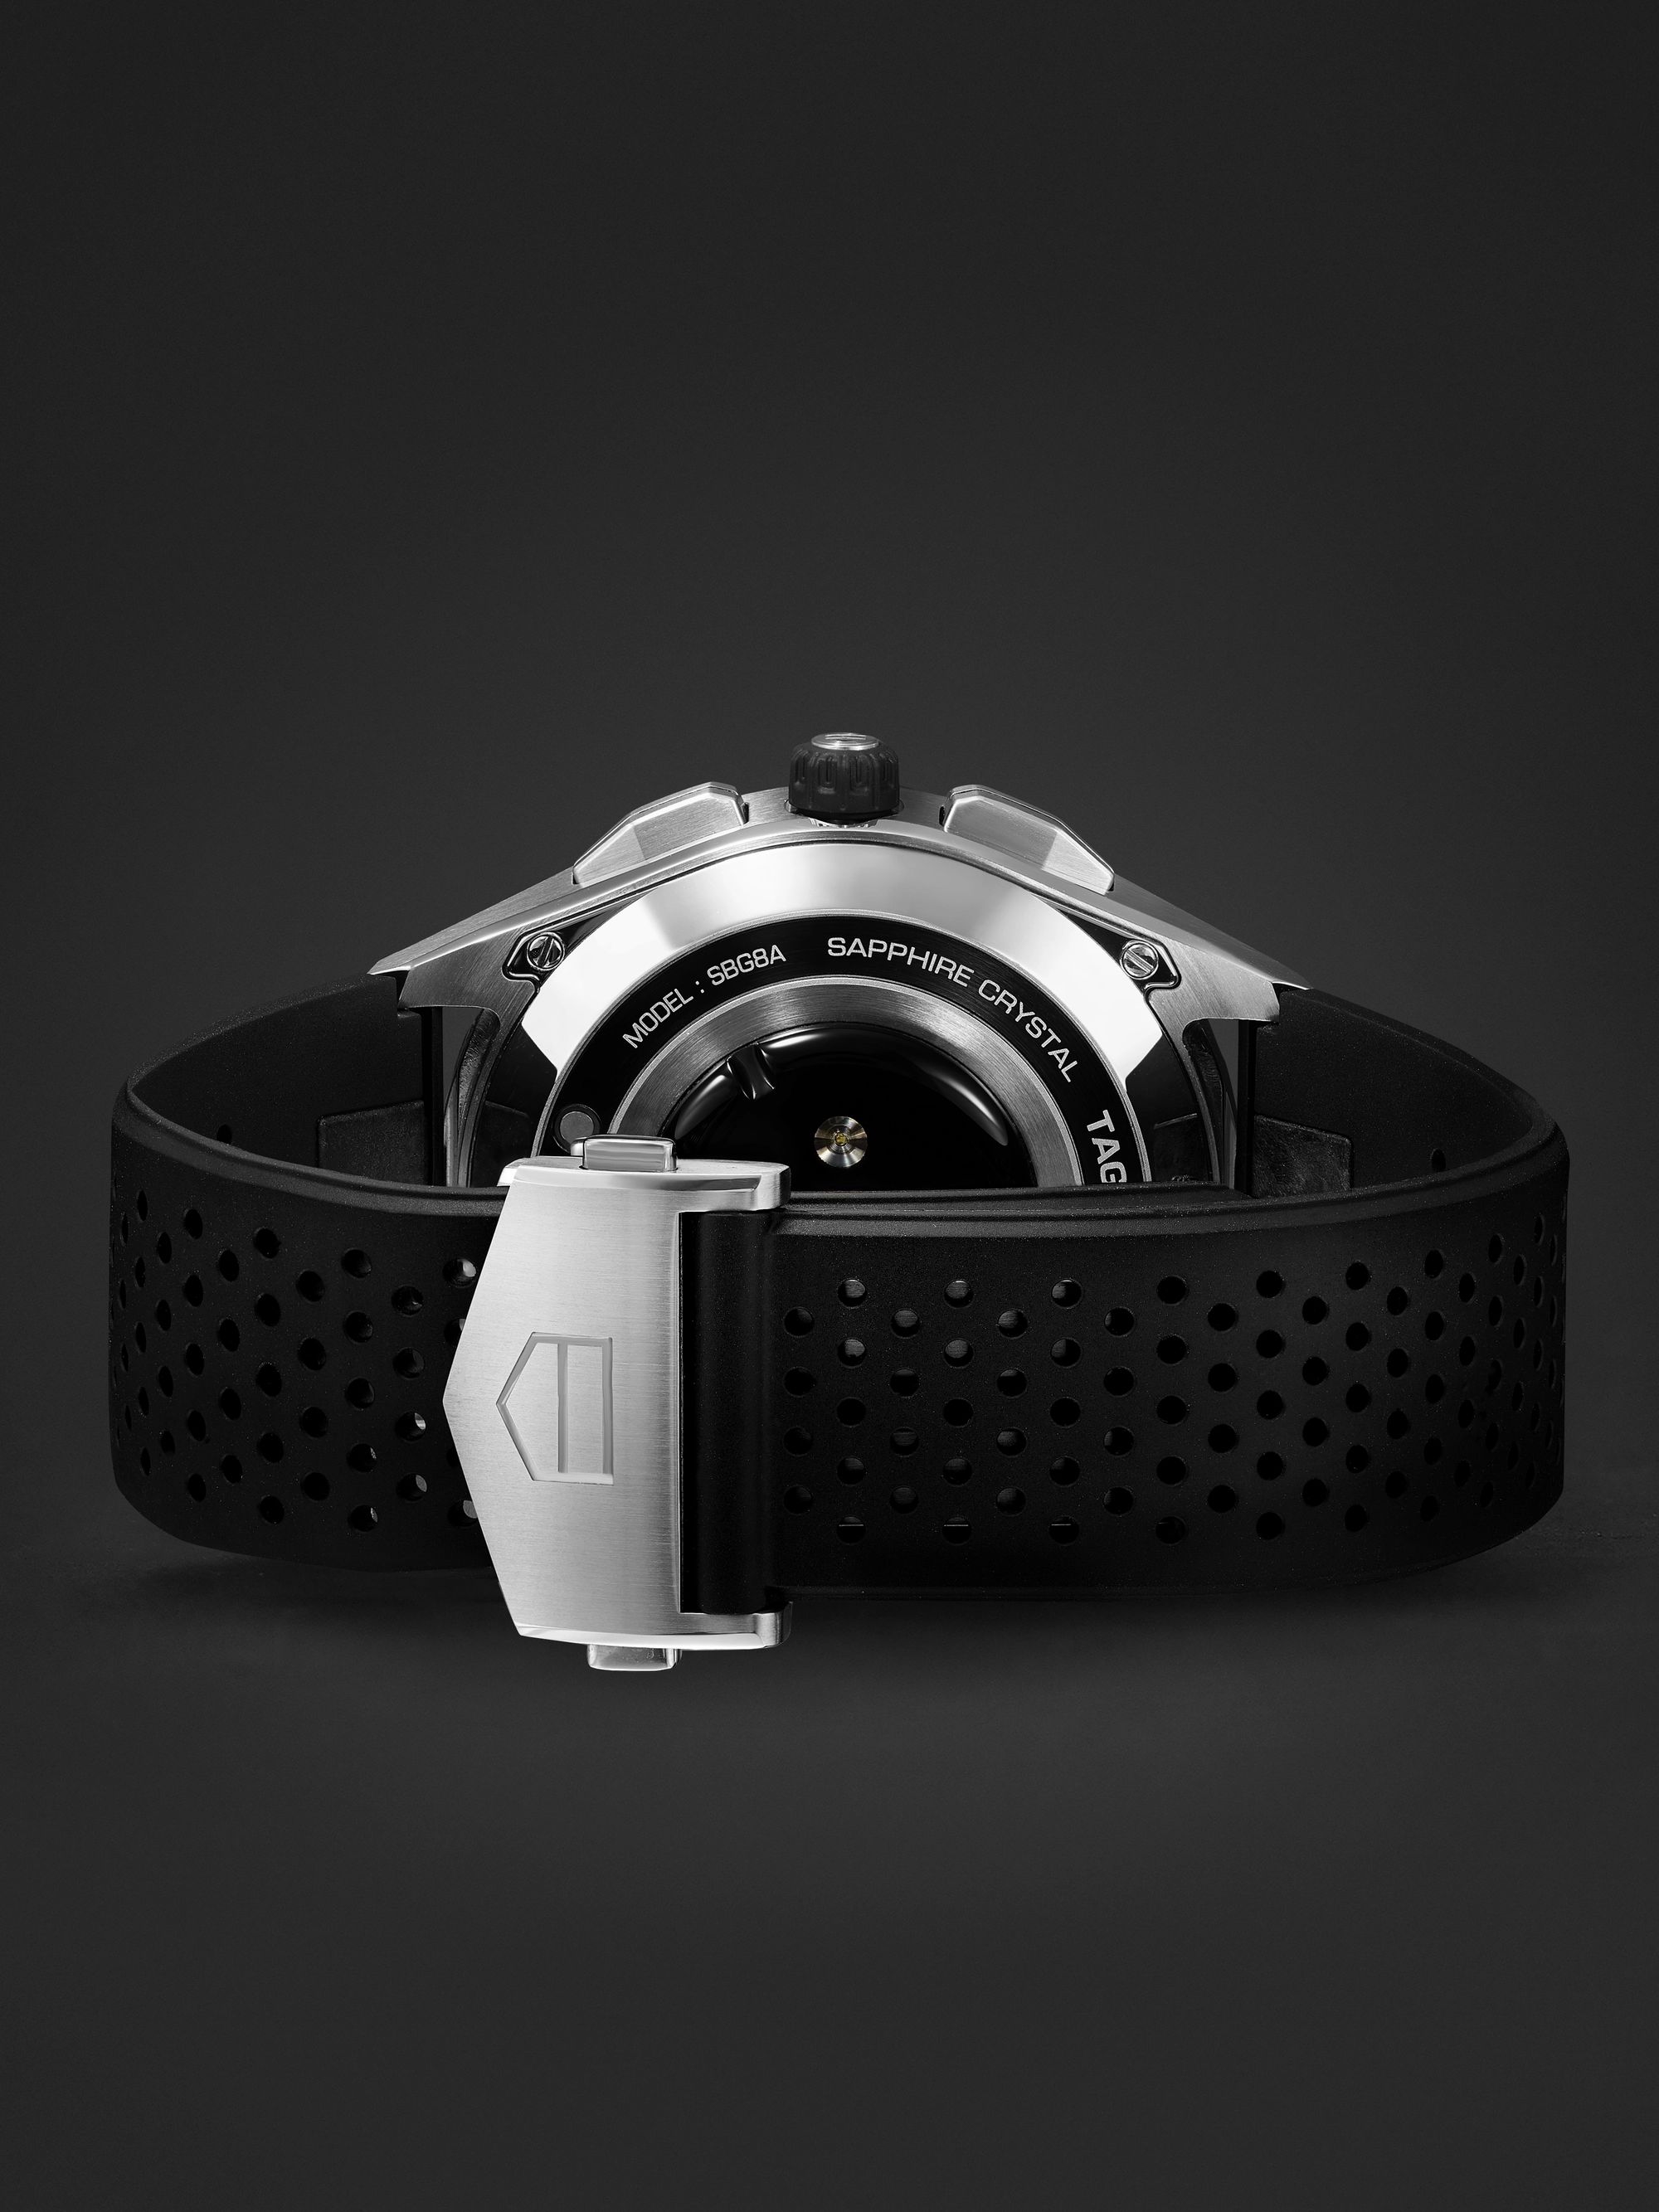 TAG Heuer Connected Modular 45mm Steel and Rubber Smart Watch, Ref. No. SBG8A10.BT6219